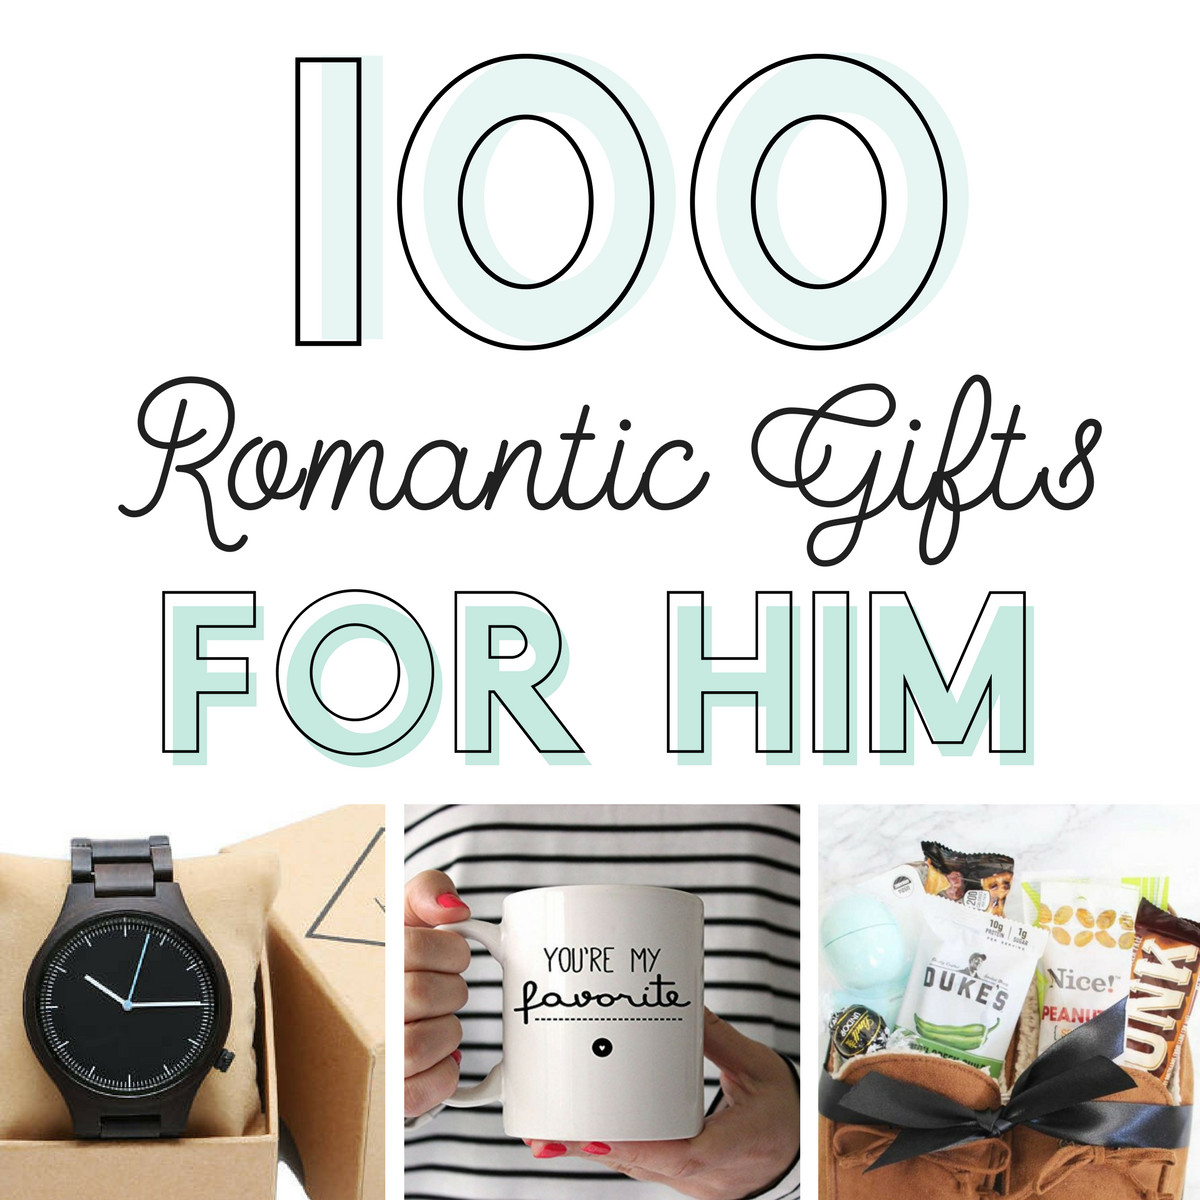 Romantic Birthday Gifts For Him
 100 Romantic Gifts for Him From The Dating Divas